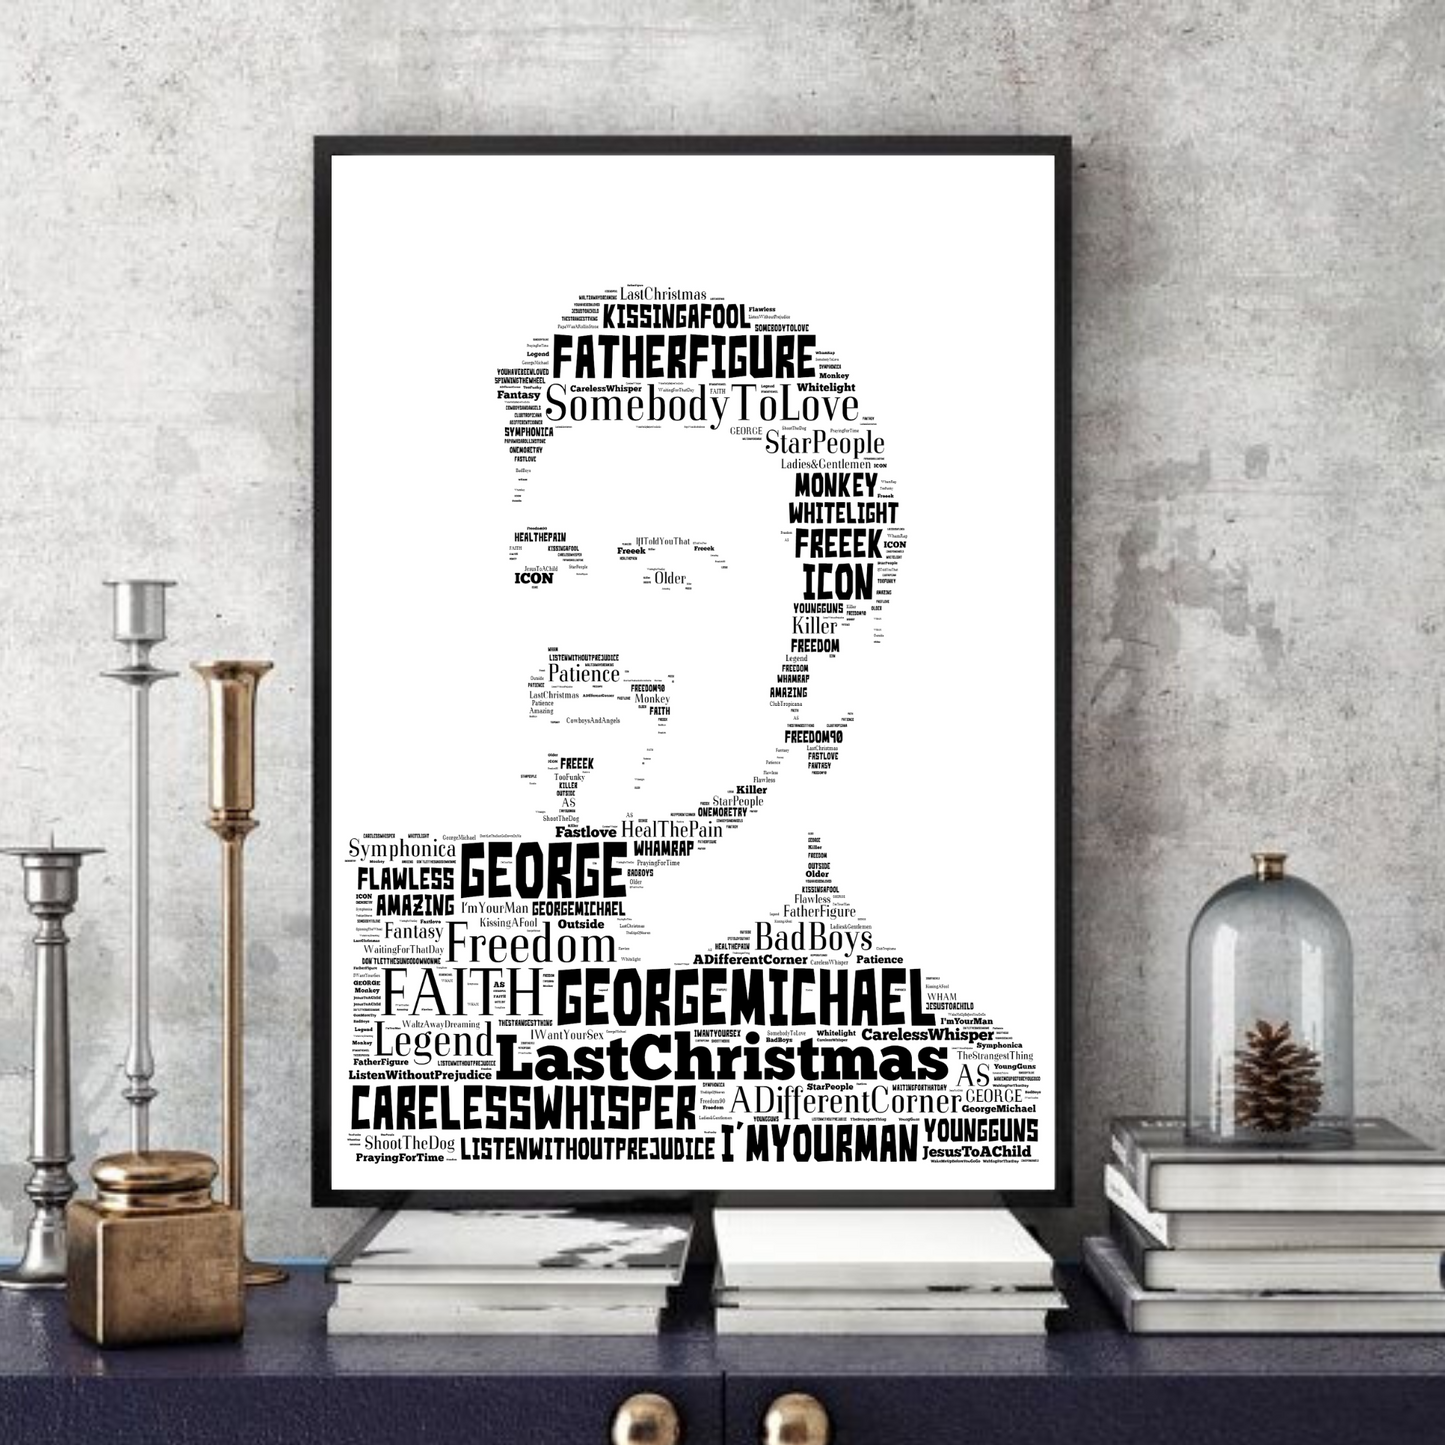 George Michael v2 - Typography Portrait in songs Collectable/print